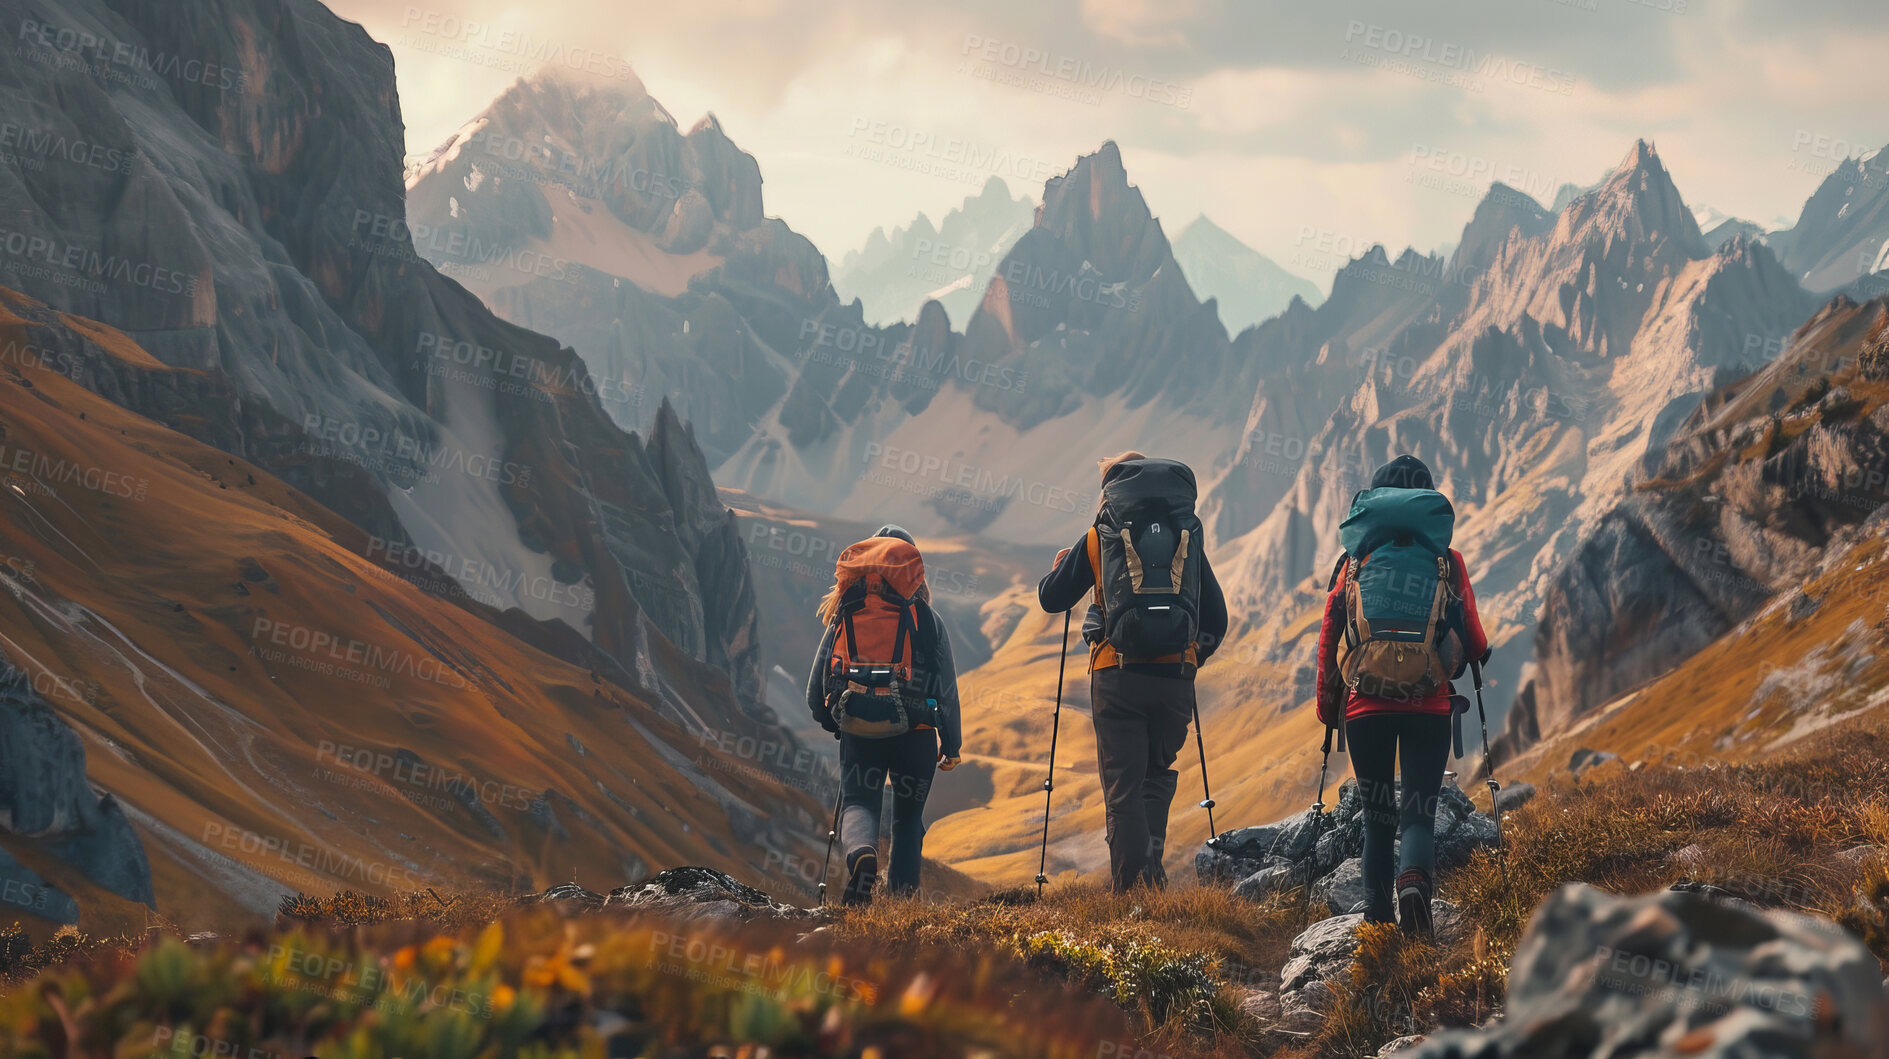 Buy stock photo Outdoor hiking, mountain and scenic views with backpacks. Exploring nature, enjoying landscapes and walking adventure on trails. Health, exercise and freedom for active lifestyle.